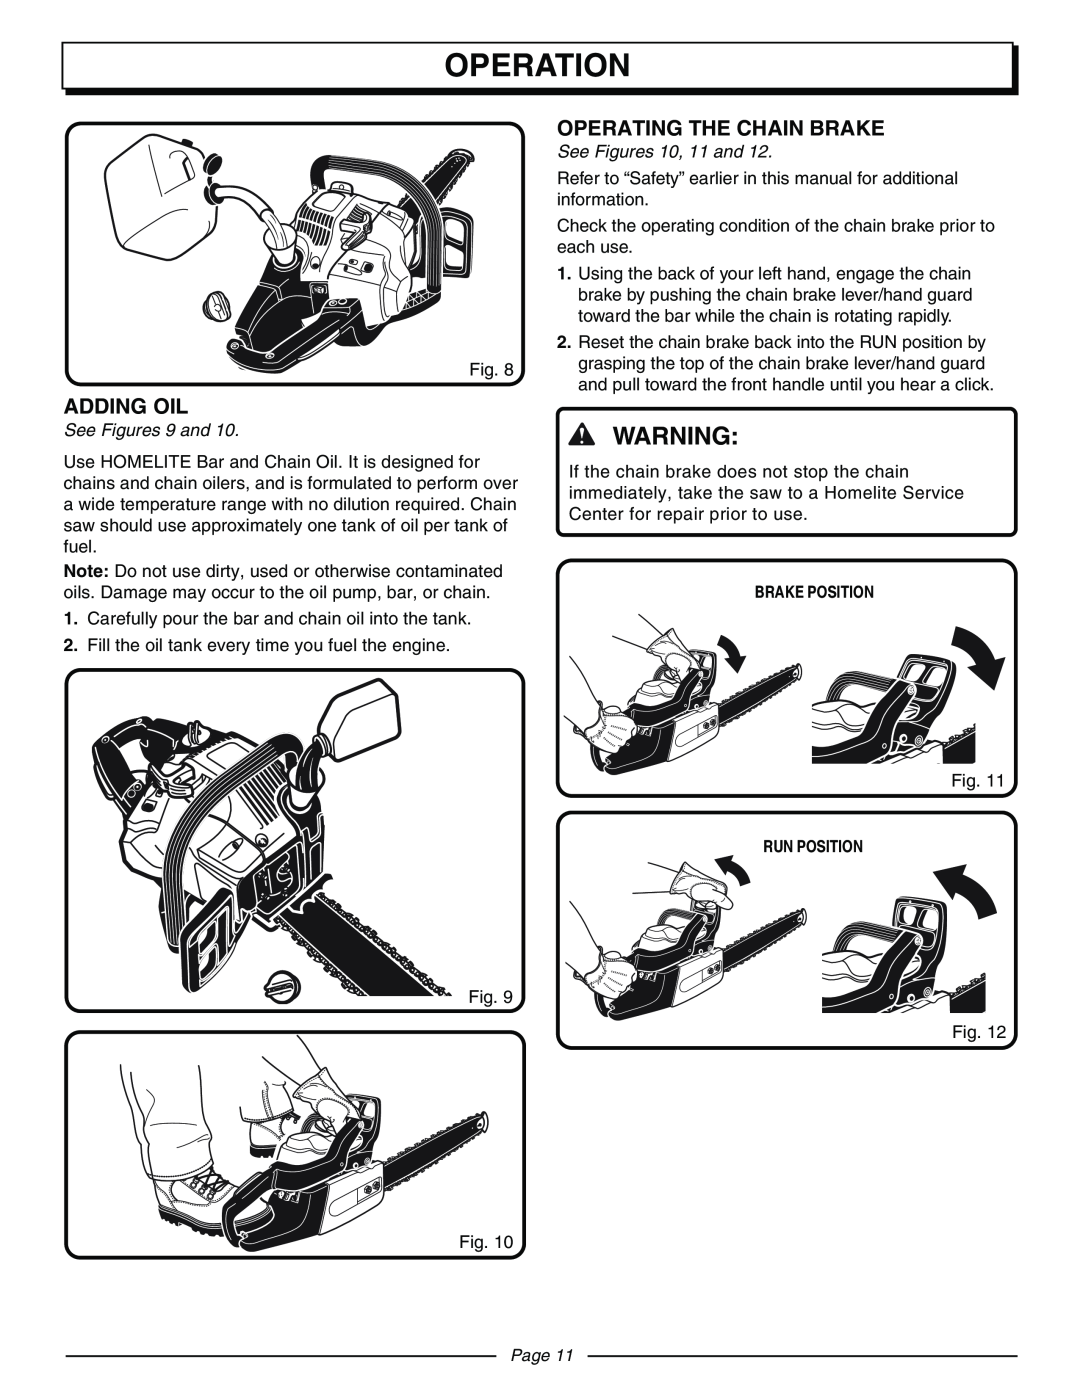 Homelite UT10942D manual Adding Oil, Operating The Chain Brake, Operation, See Figures 9 and, See Figures 10, 11 and, Page 